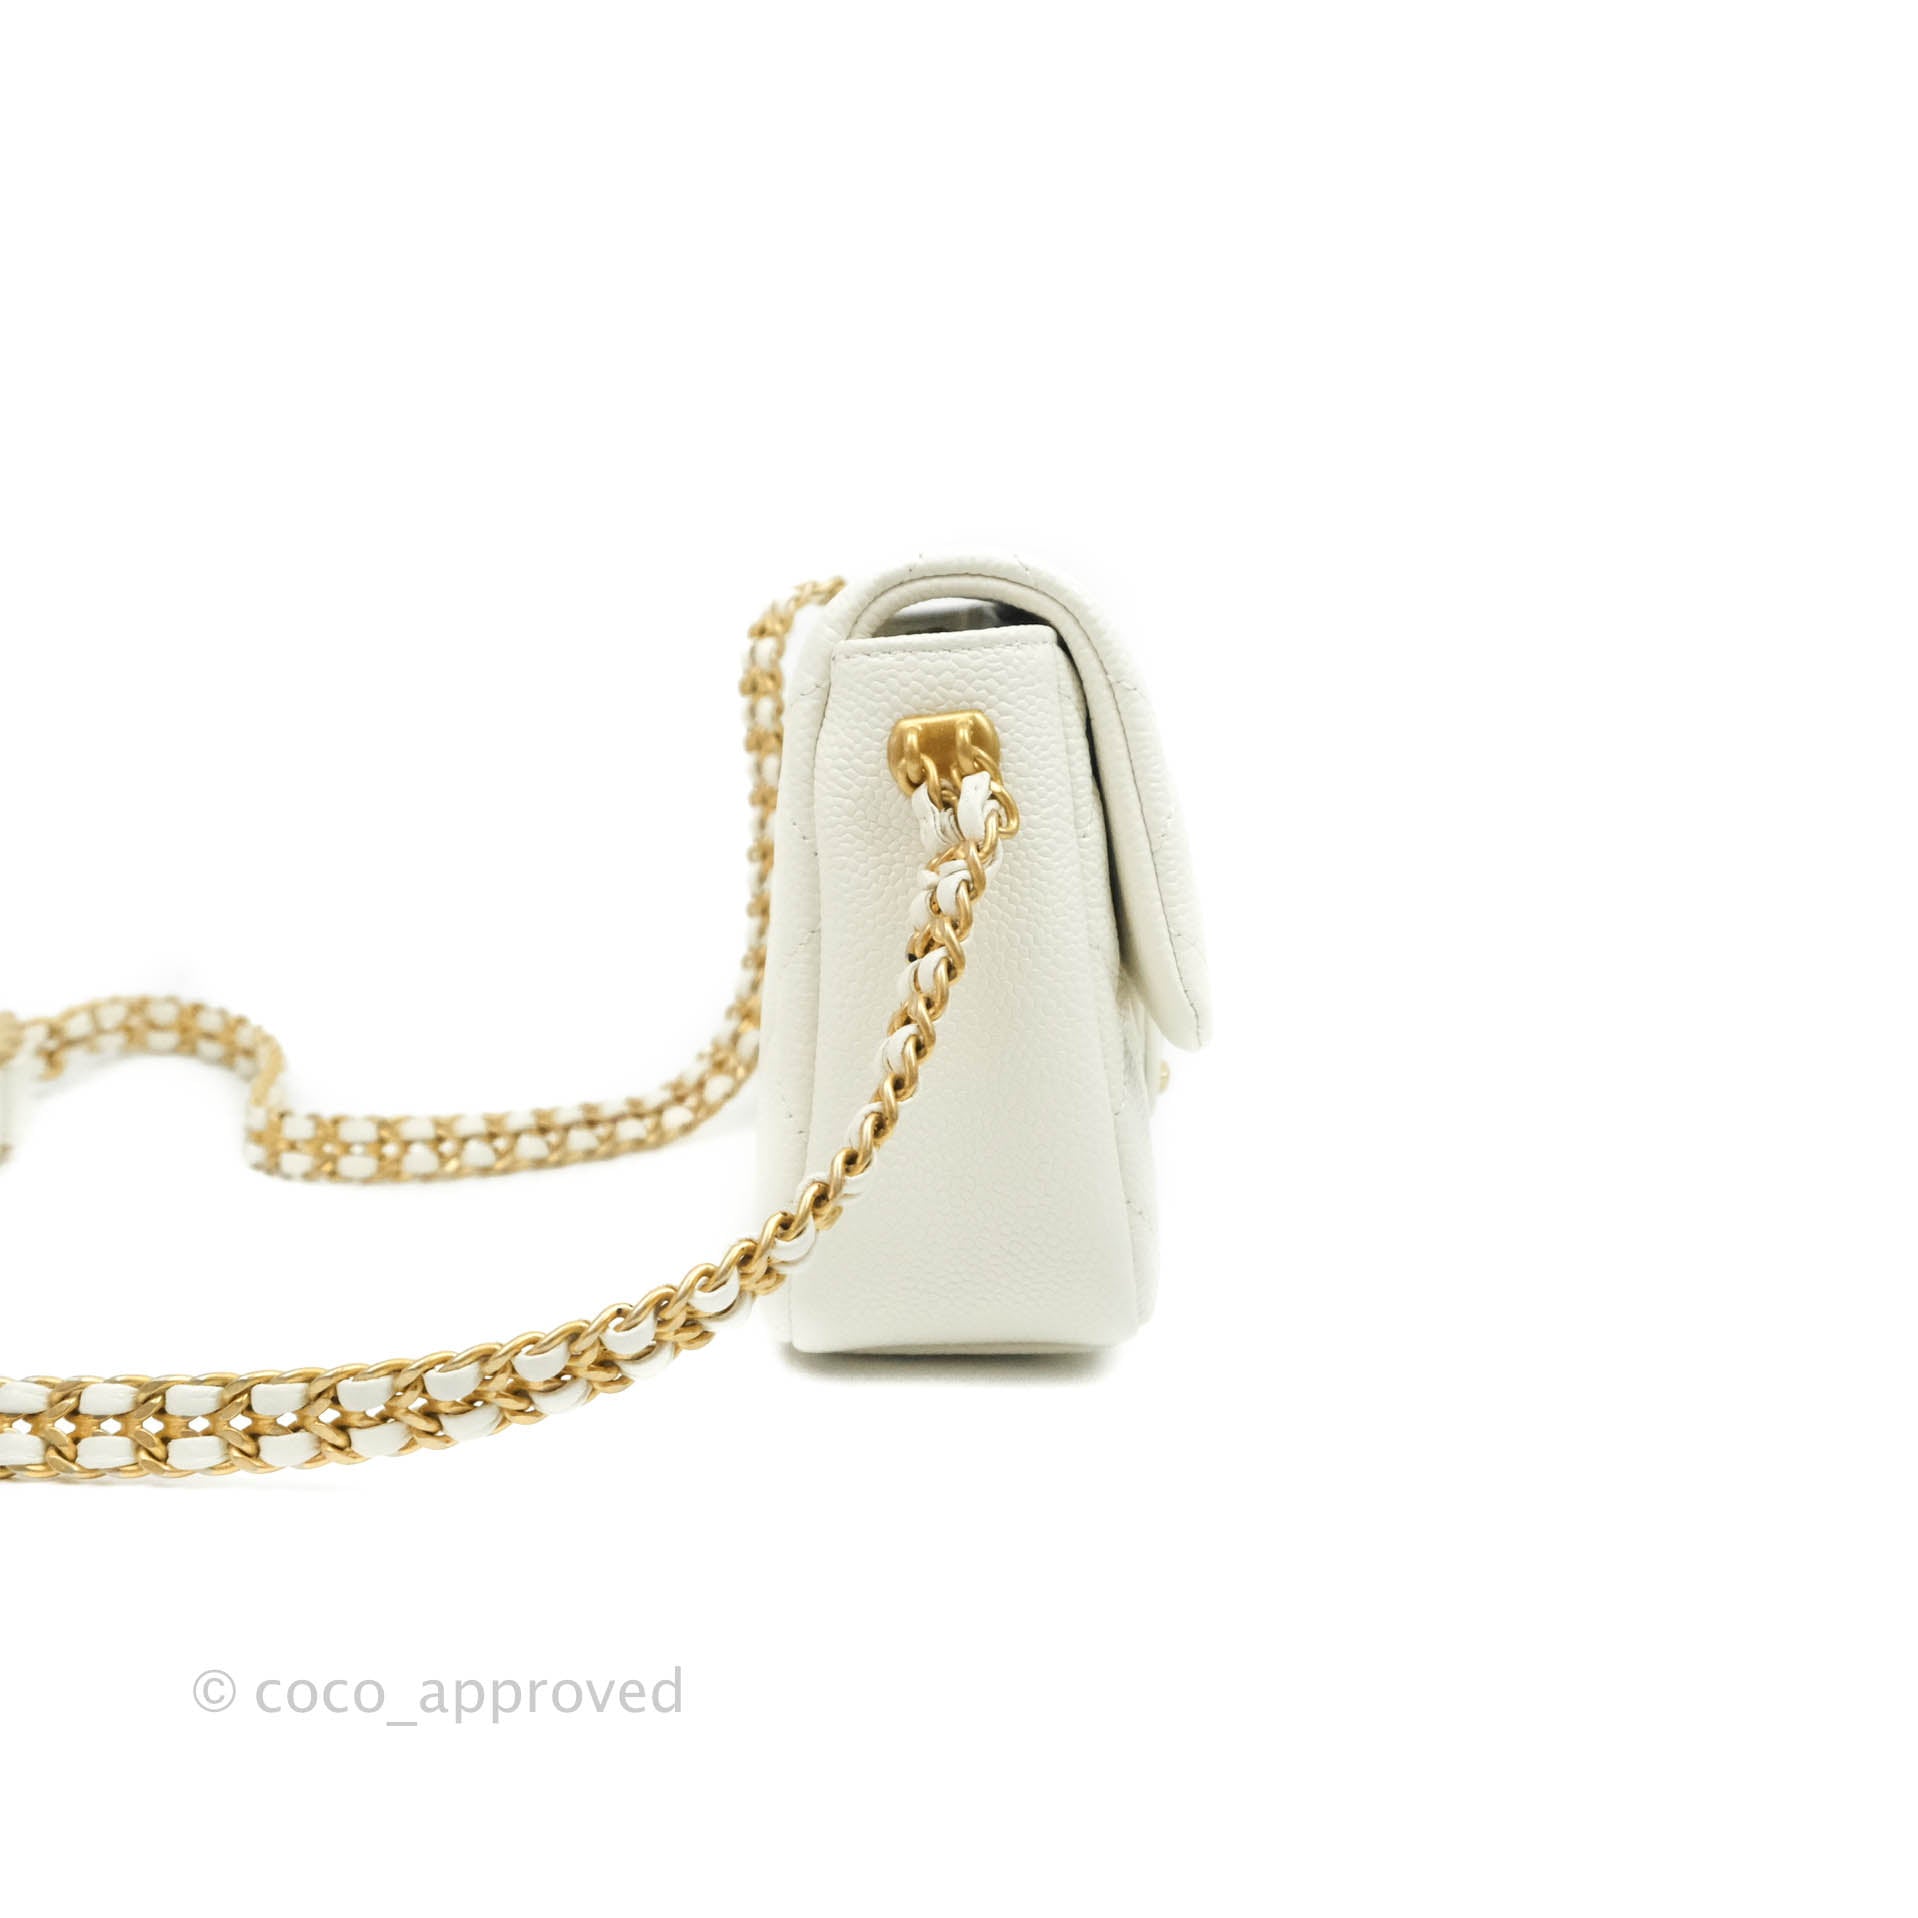 white chanel clutch with chain